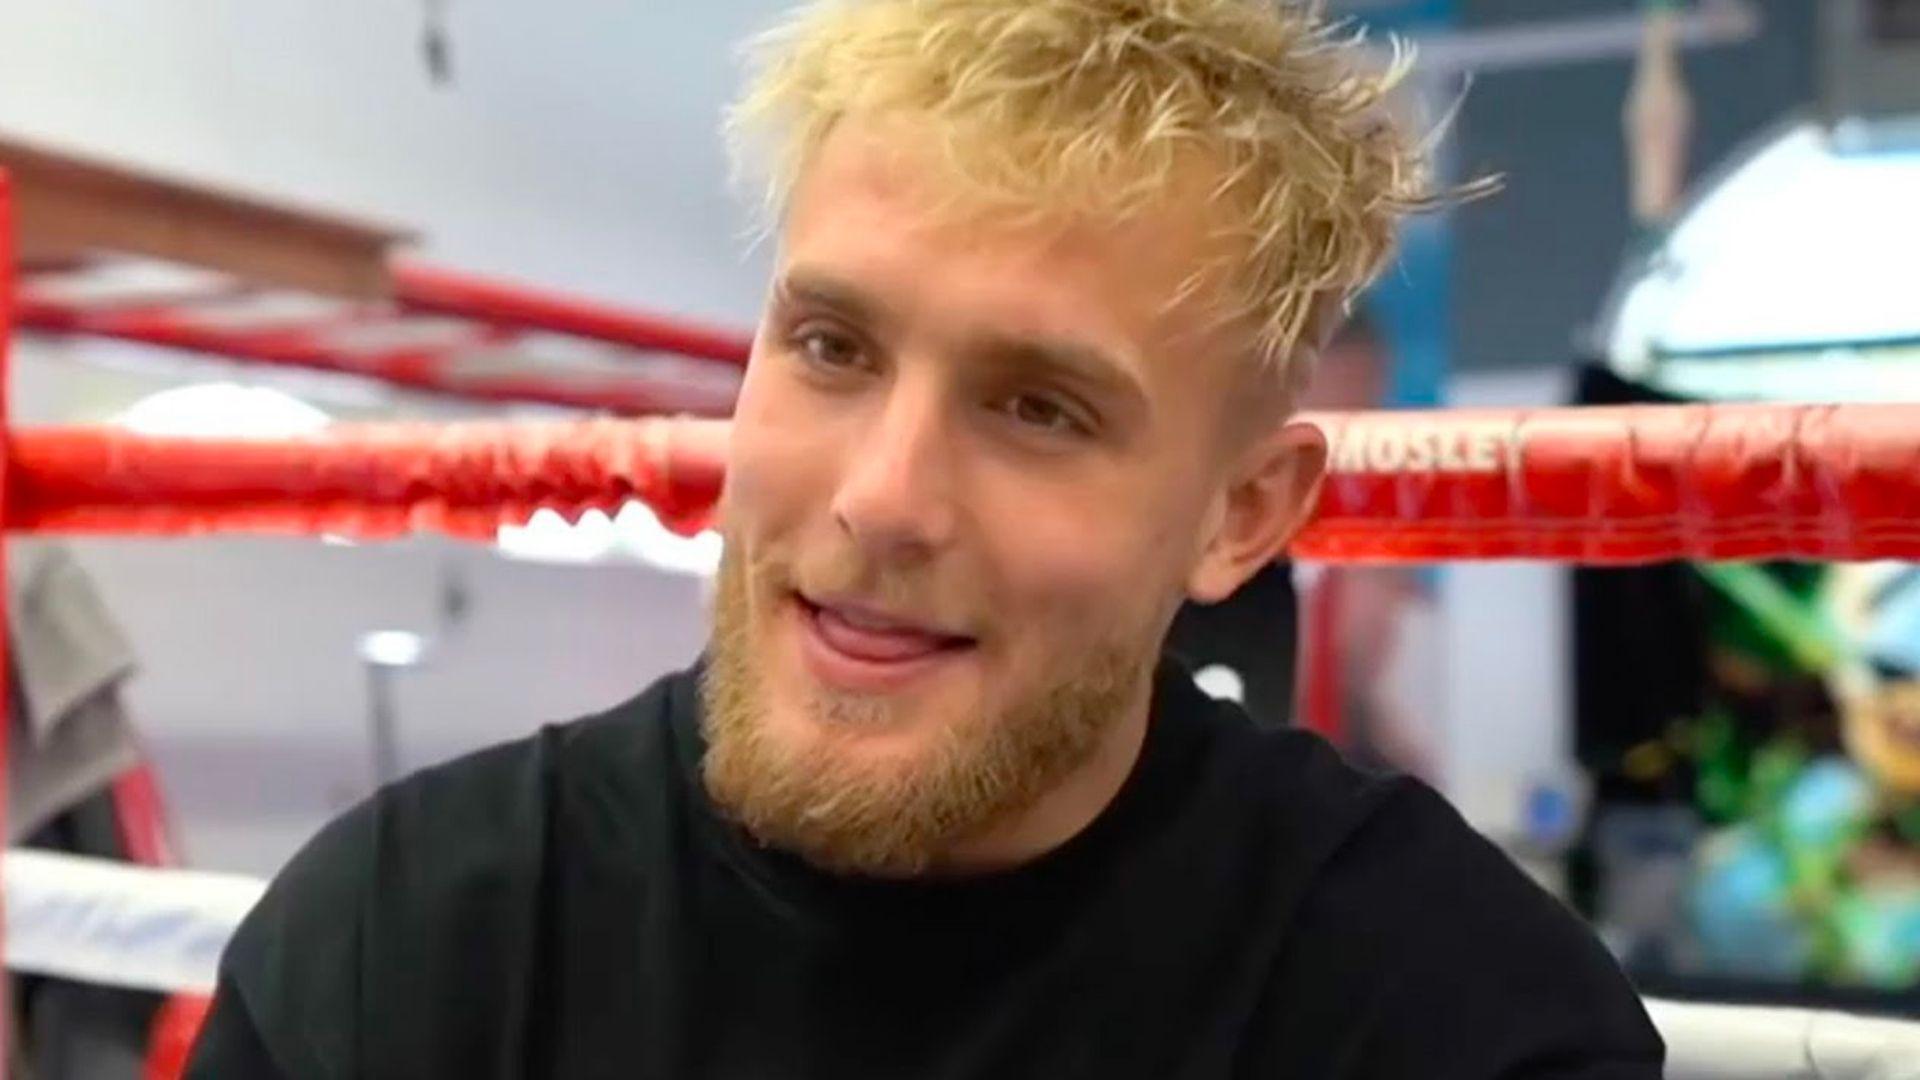 Jake Paul pulling tongues on ringside of boxing ring